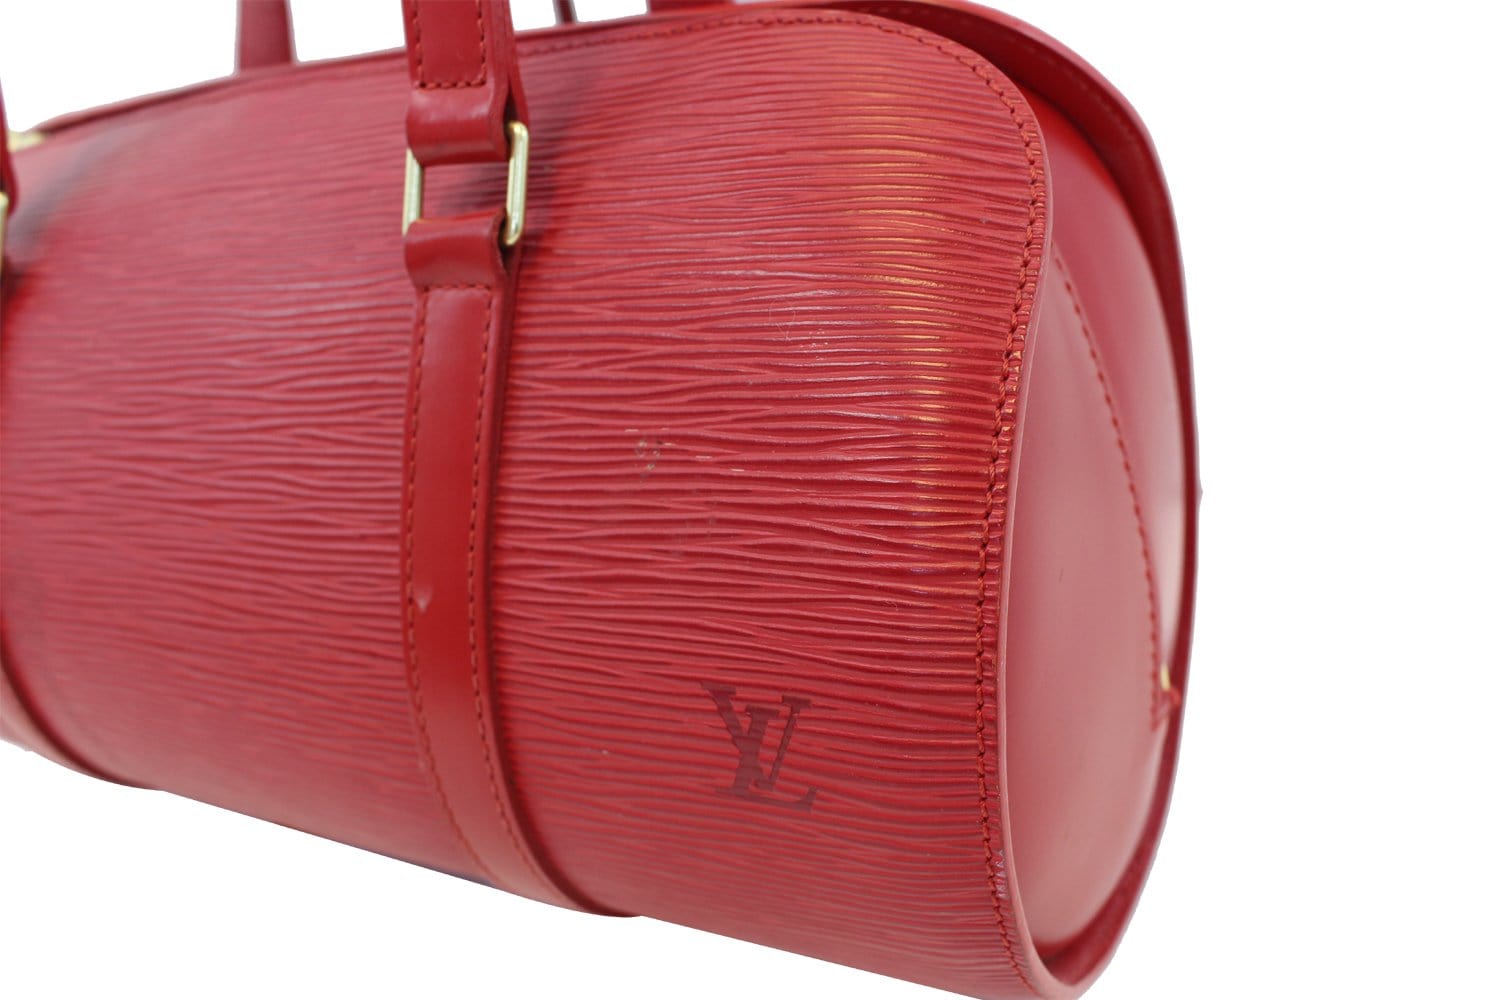 LOUIS VUITTON. Travel bag in red epi leather, with tag a…